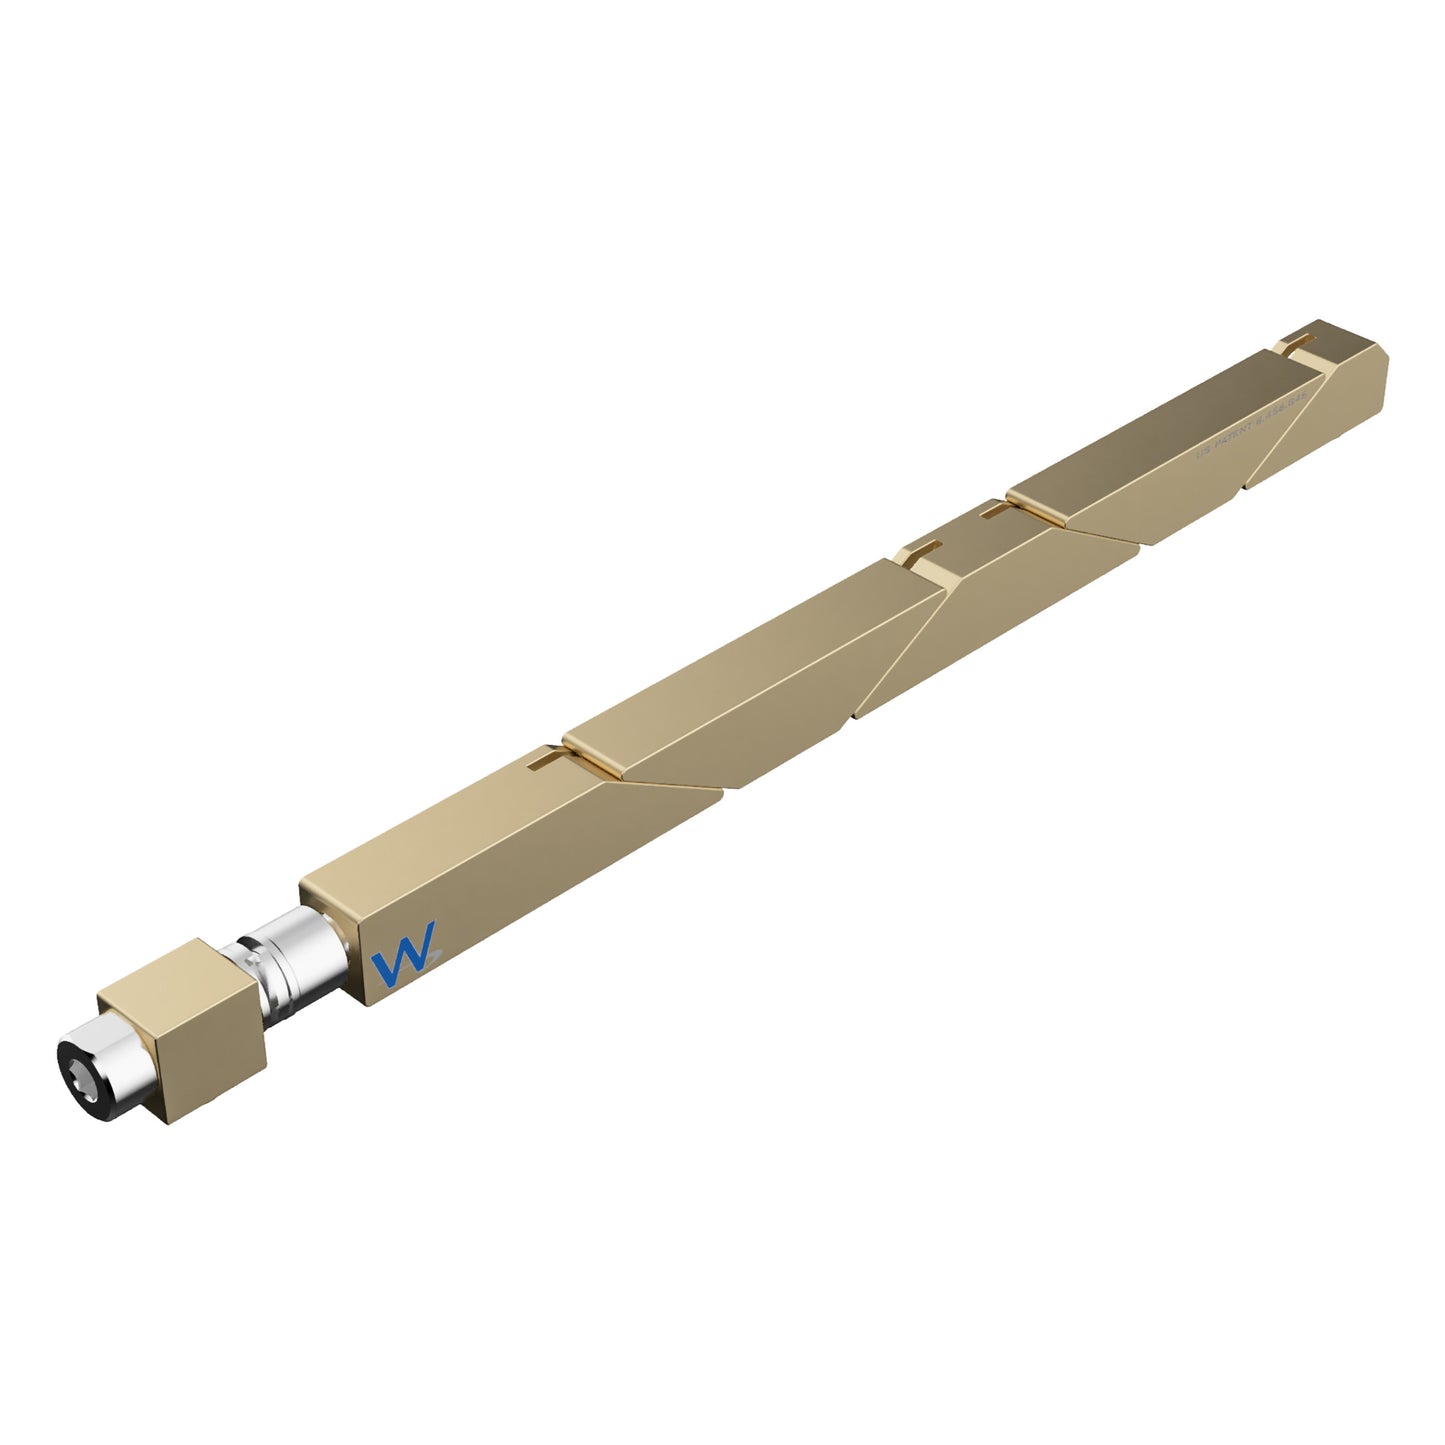 SW5-43-270-225 Max Force Wedgelock, segmented long rectulangular hardware component, Gold Chemical Film Finish